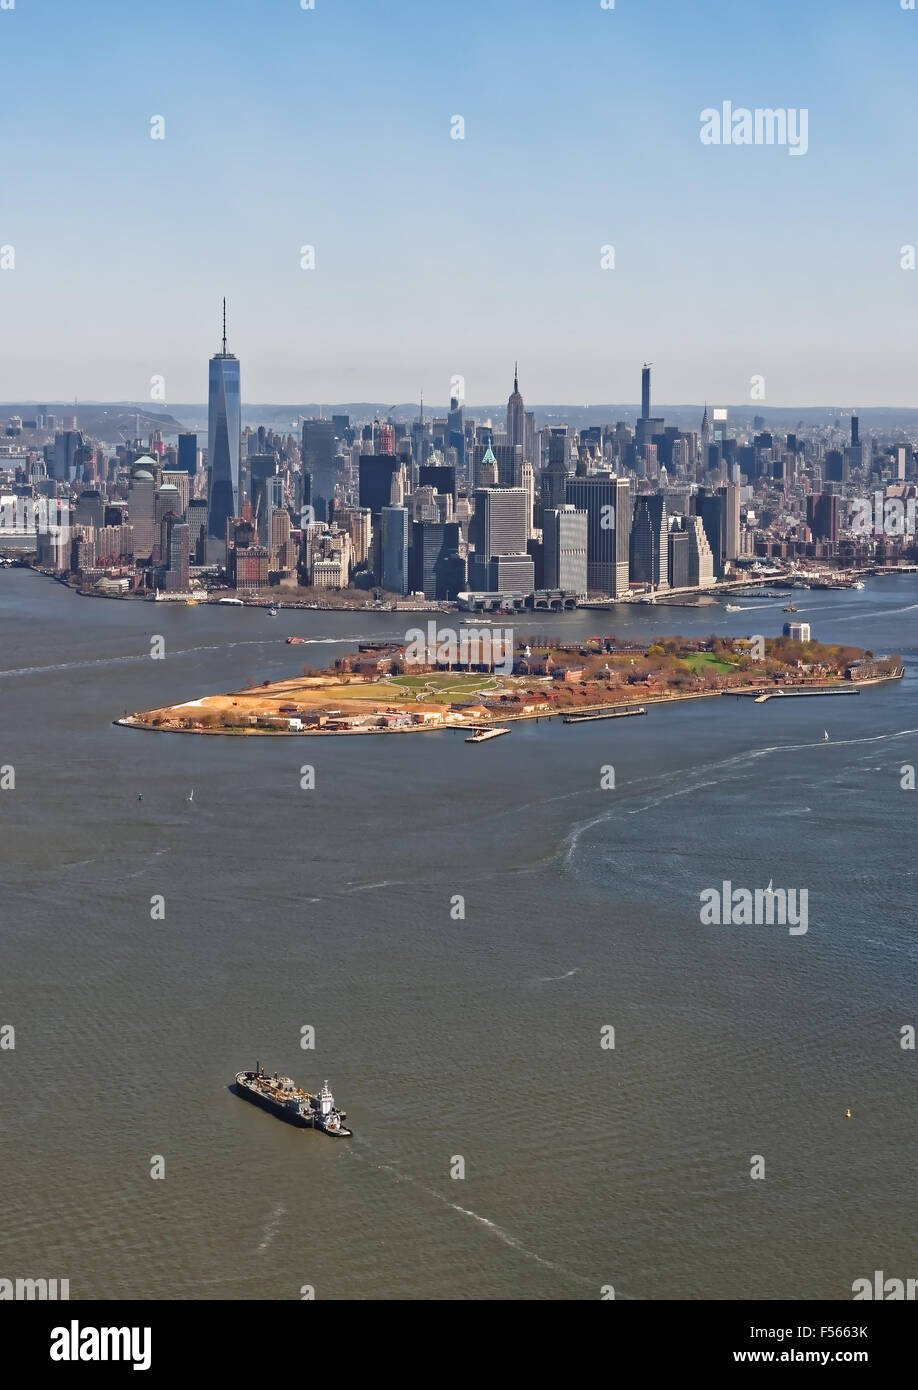 Aerial view of Manhattan with Governors Island in the foreground, New York, USA. Located in Upper New York Bay, Governors Island is home to historical fortifications Fort Jay and Castle Williams Stock Photo